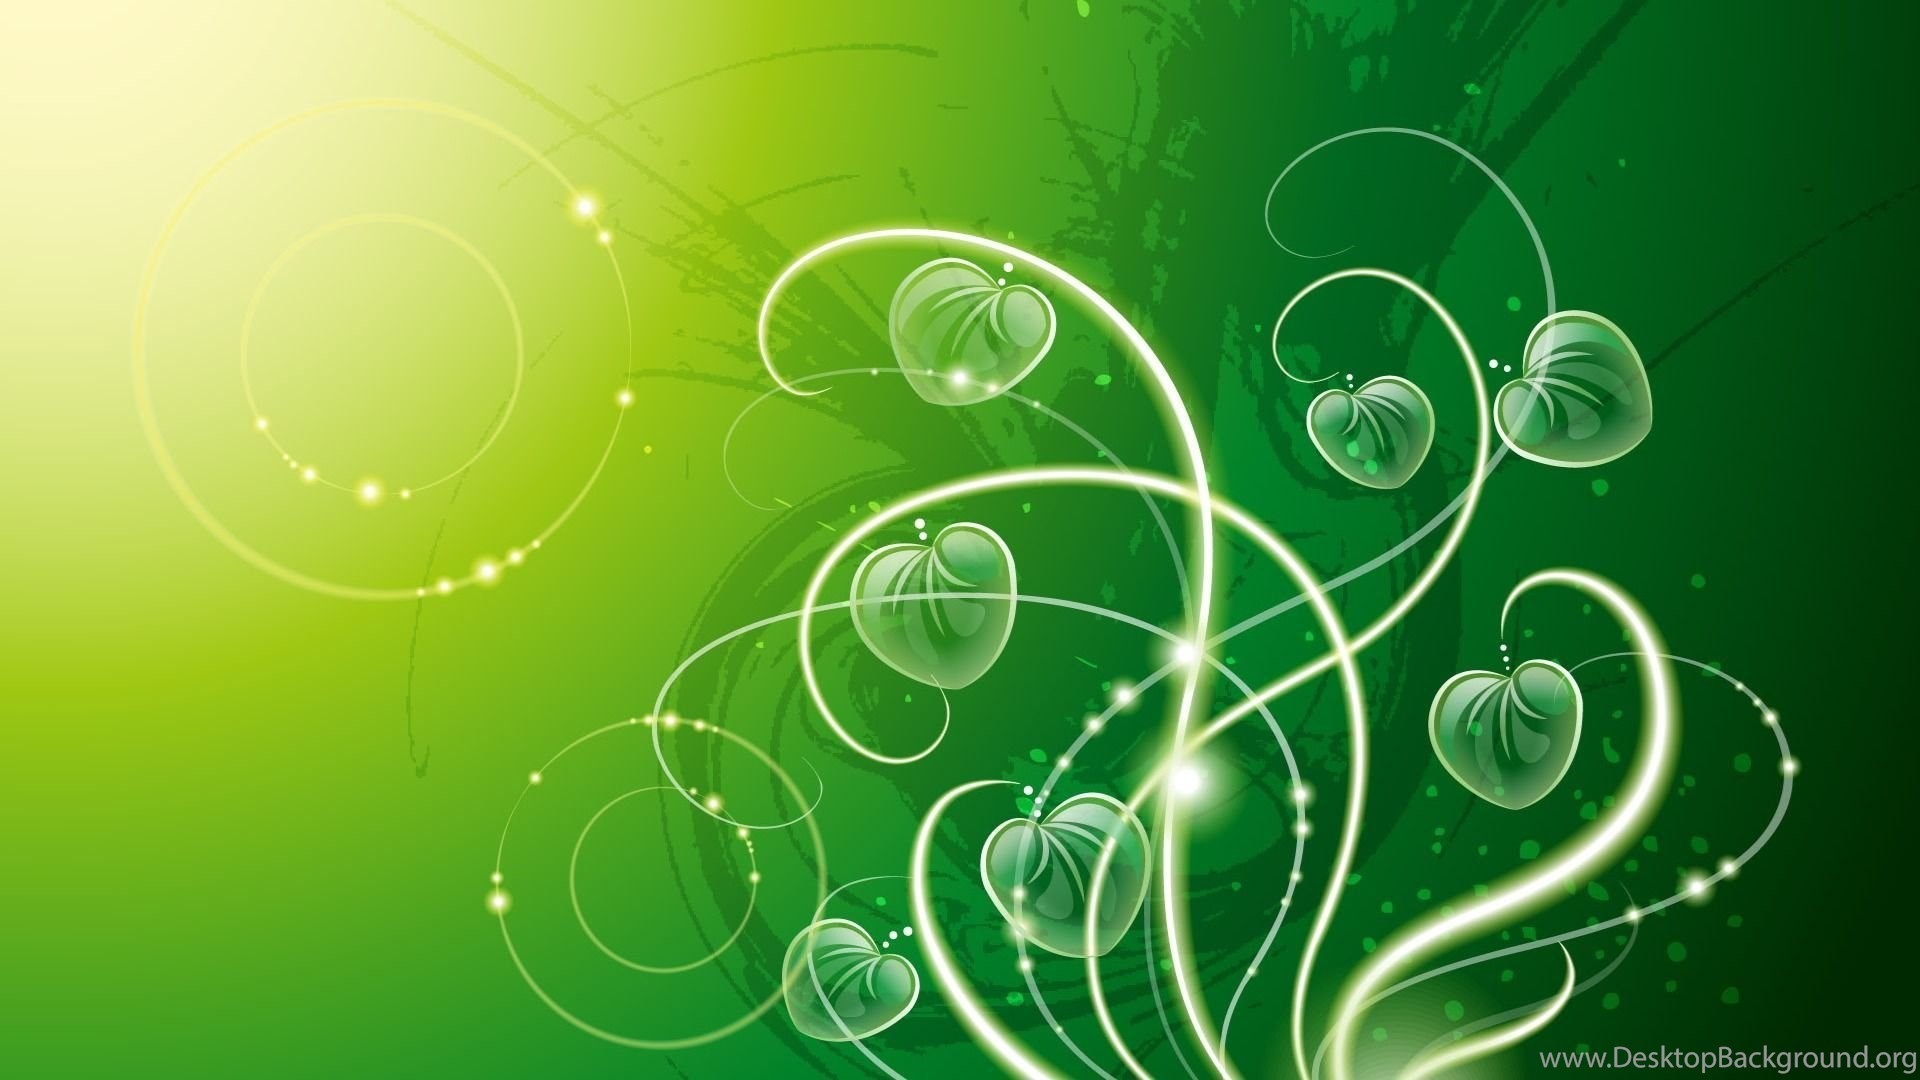 1920x1080 Green Backgrounds HD Wallpapers HD Wallpaper Backgrounds Of Your .